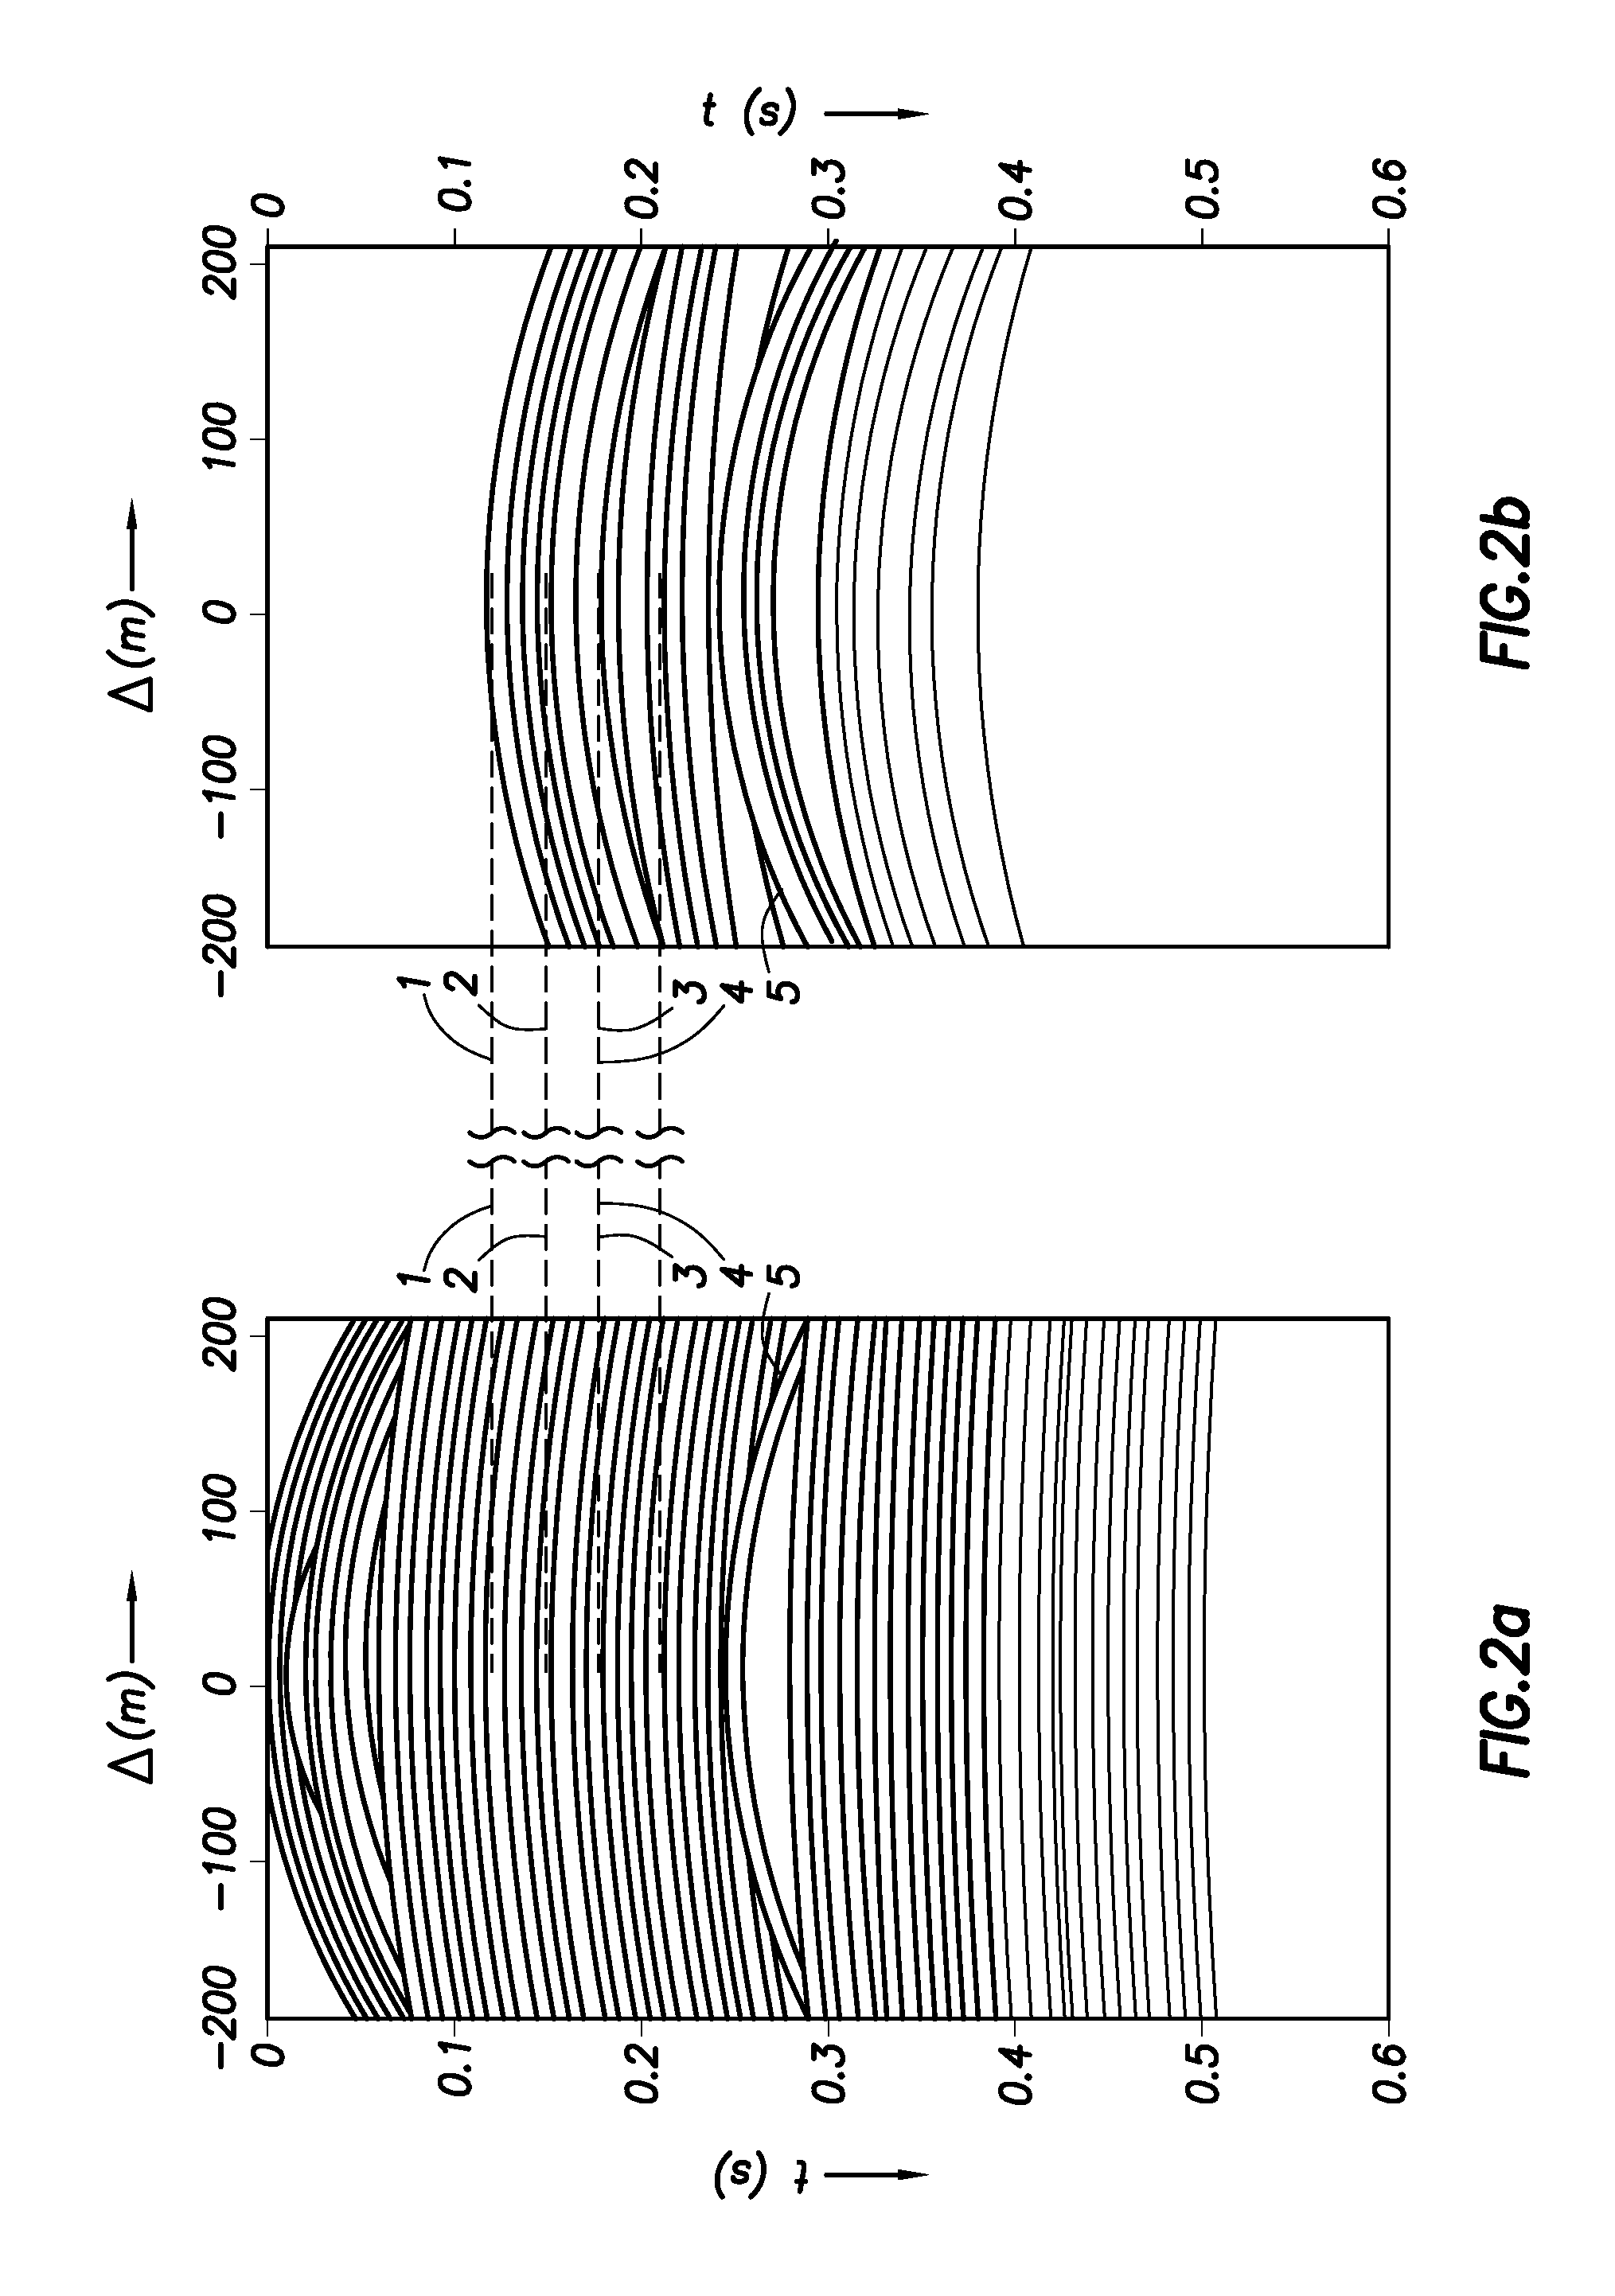 Method of imaging of seismic data involving a virtual source, methods of producing a hydrocarbon fluid, and a computer readable medium